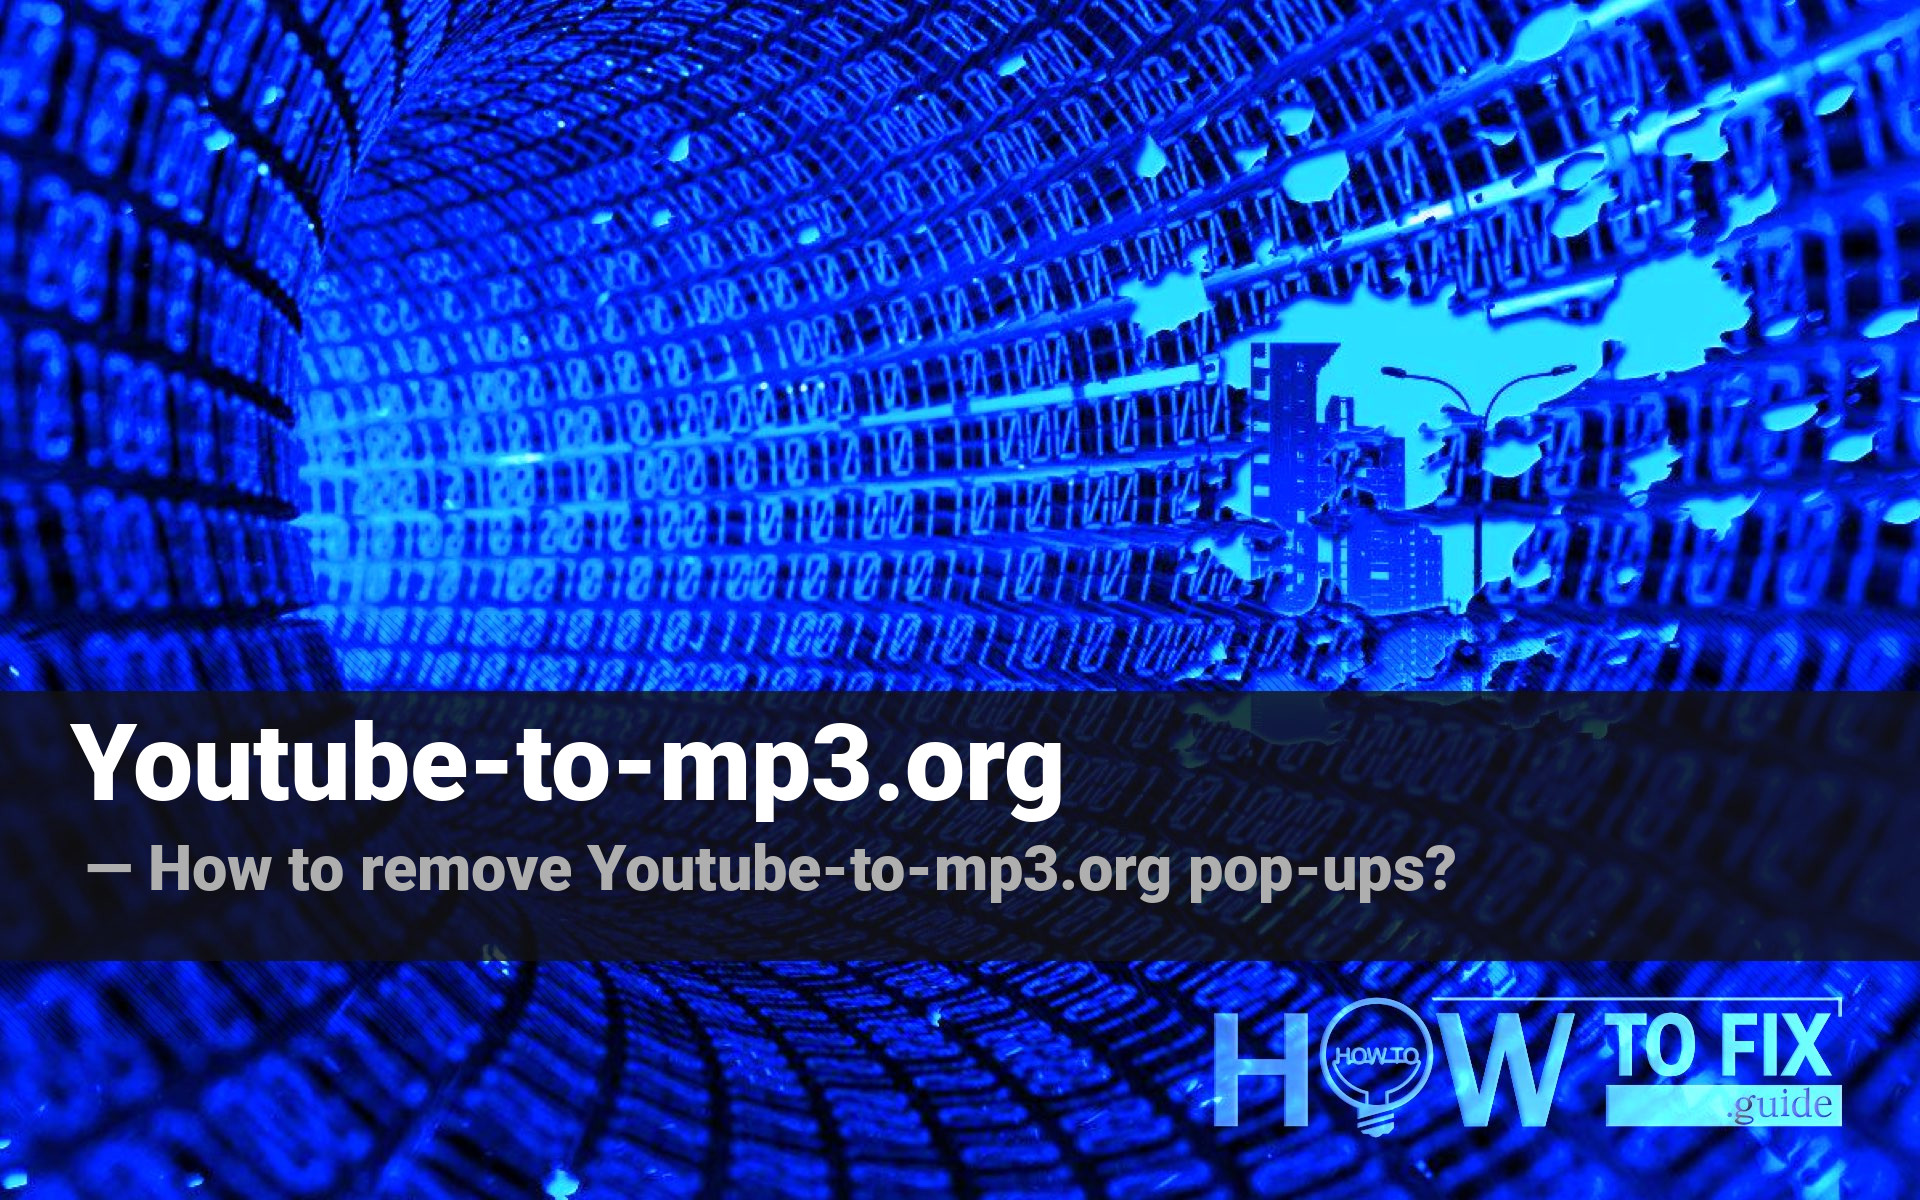 tit radium bliver nervøs Remove Youtube-to-mp3.org Pop-up Ads — How to Fix Gude